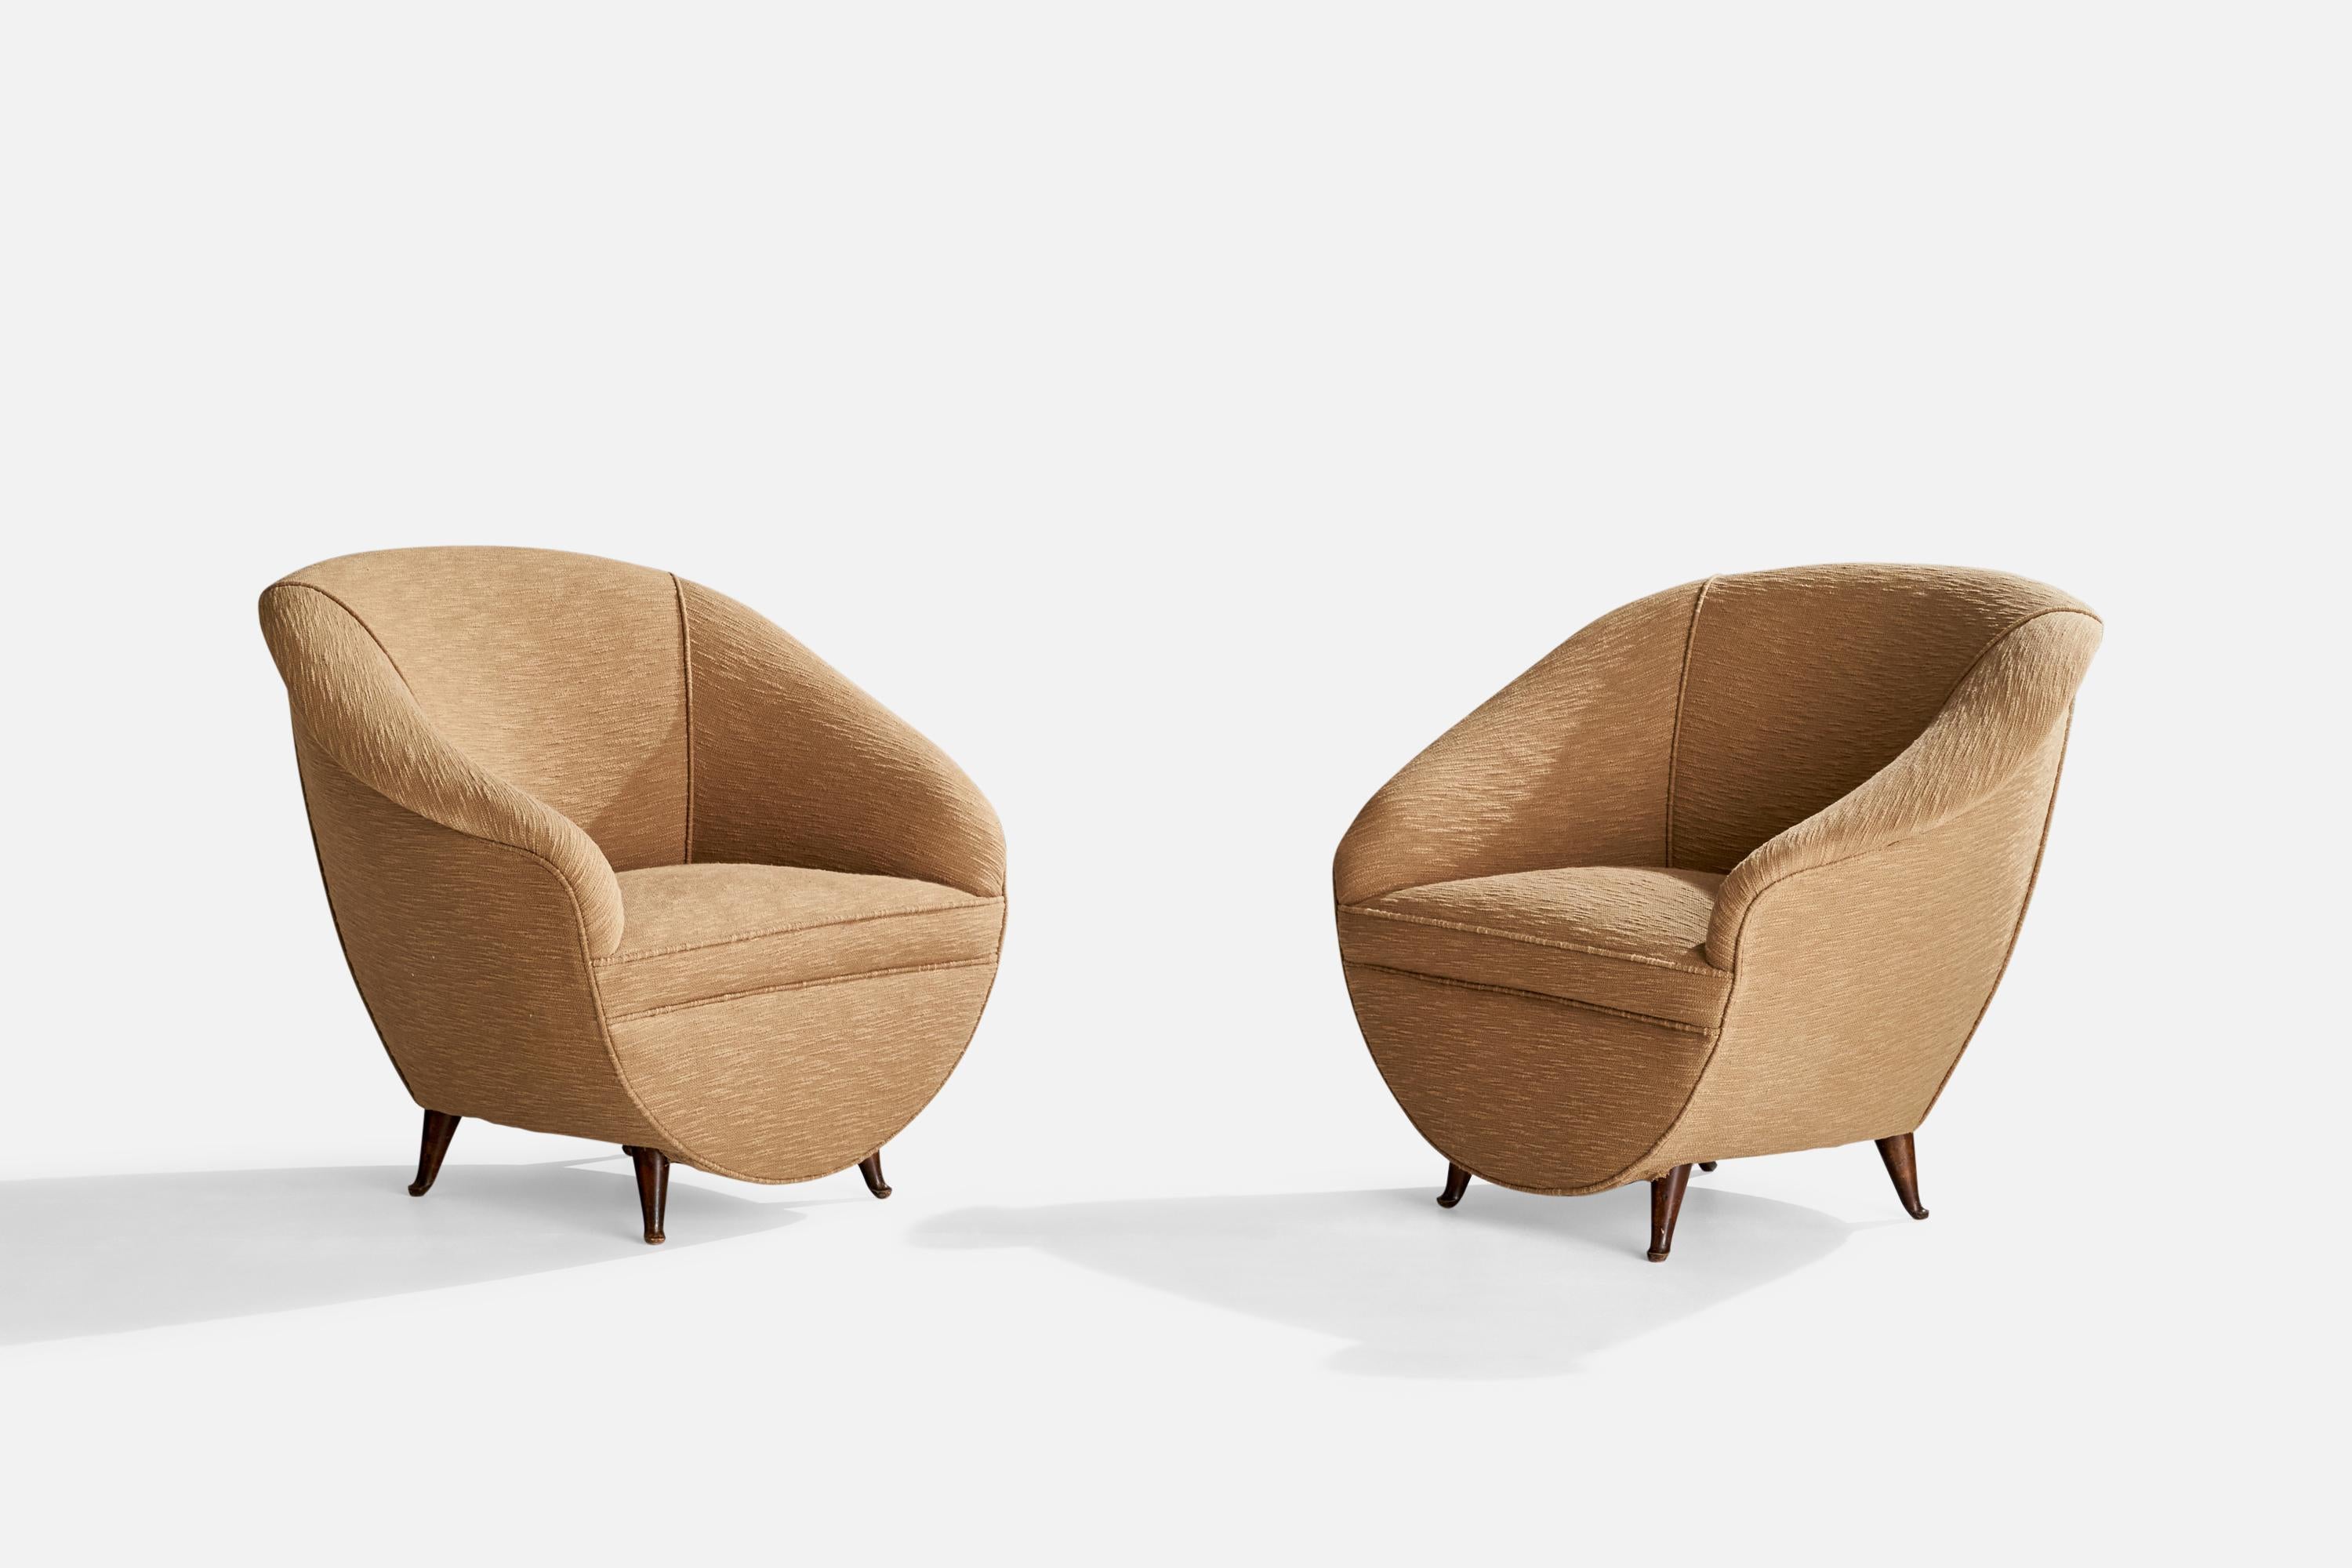 A pair of beige fabric and walnut lounge chairs designed and produced in Italy, 1940s.

Seat height: 15.5”